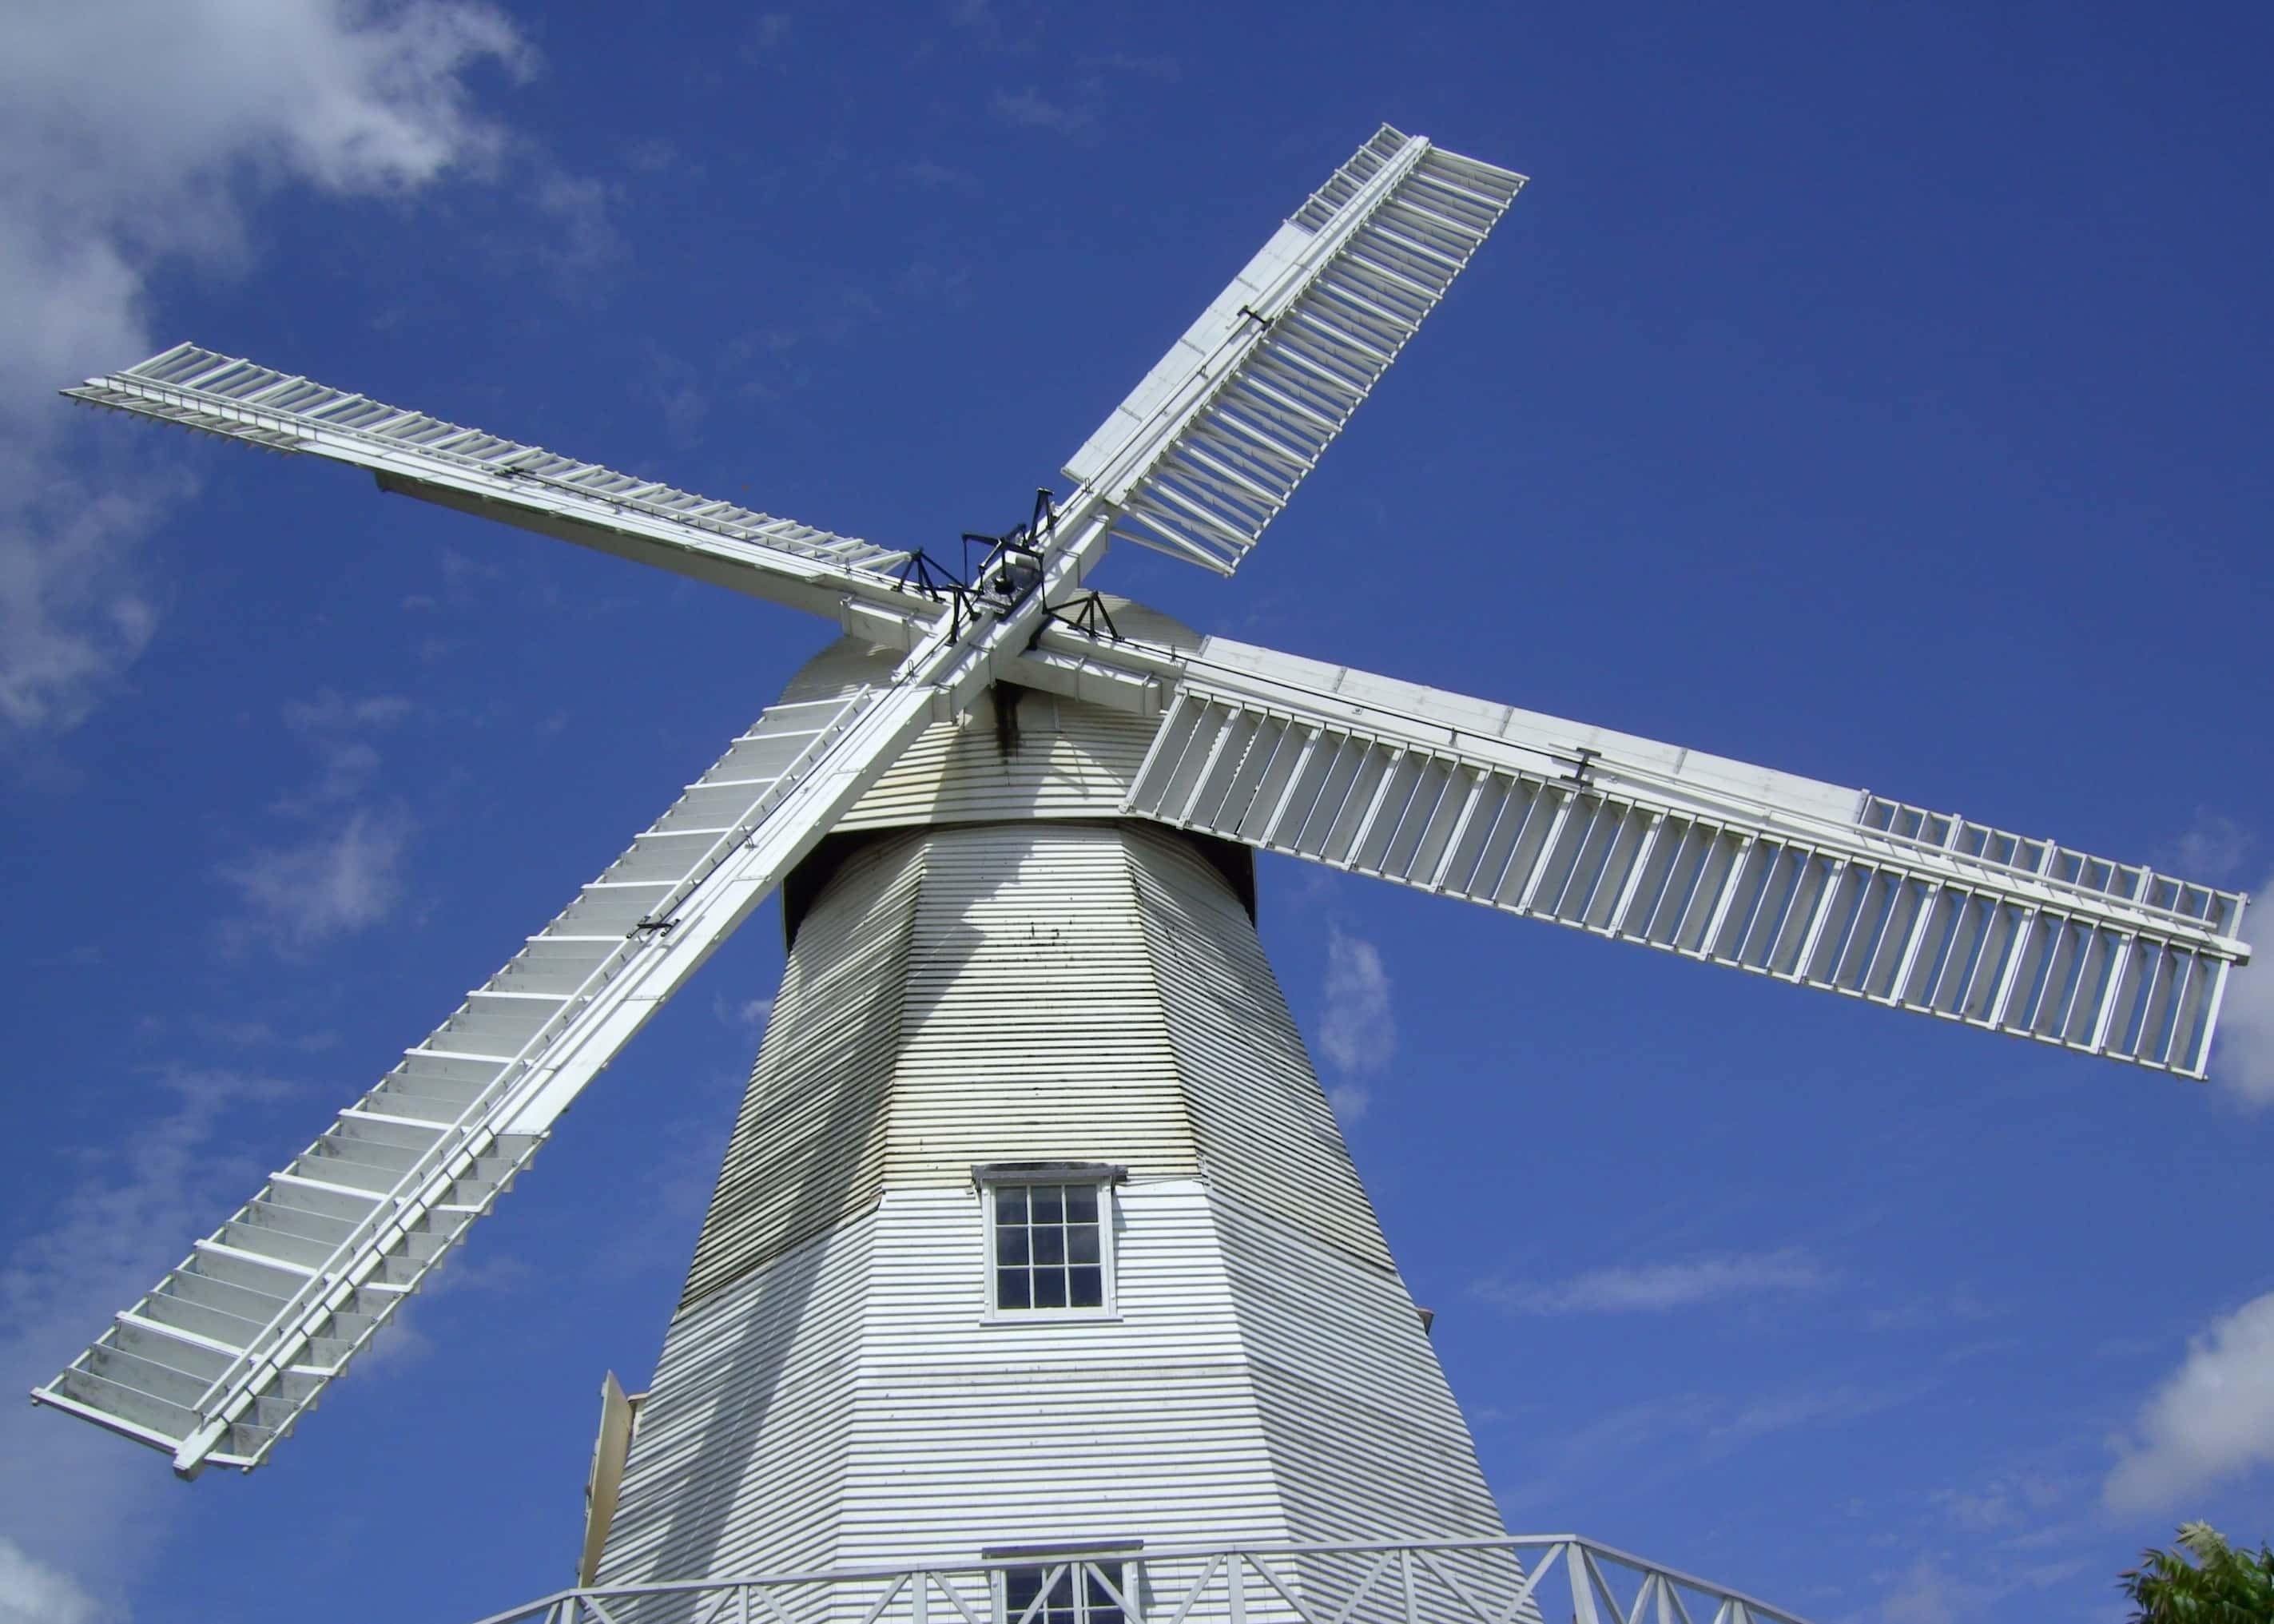 Willesborough Windmill for hire